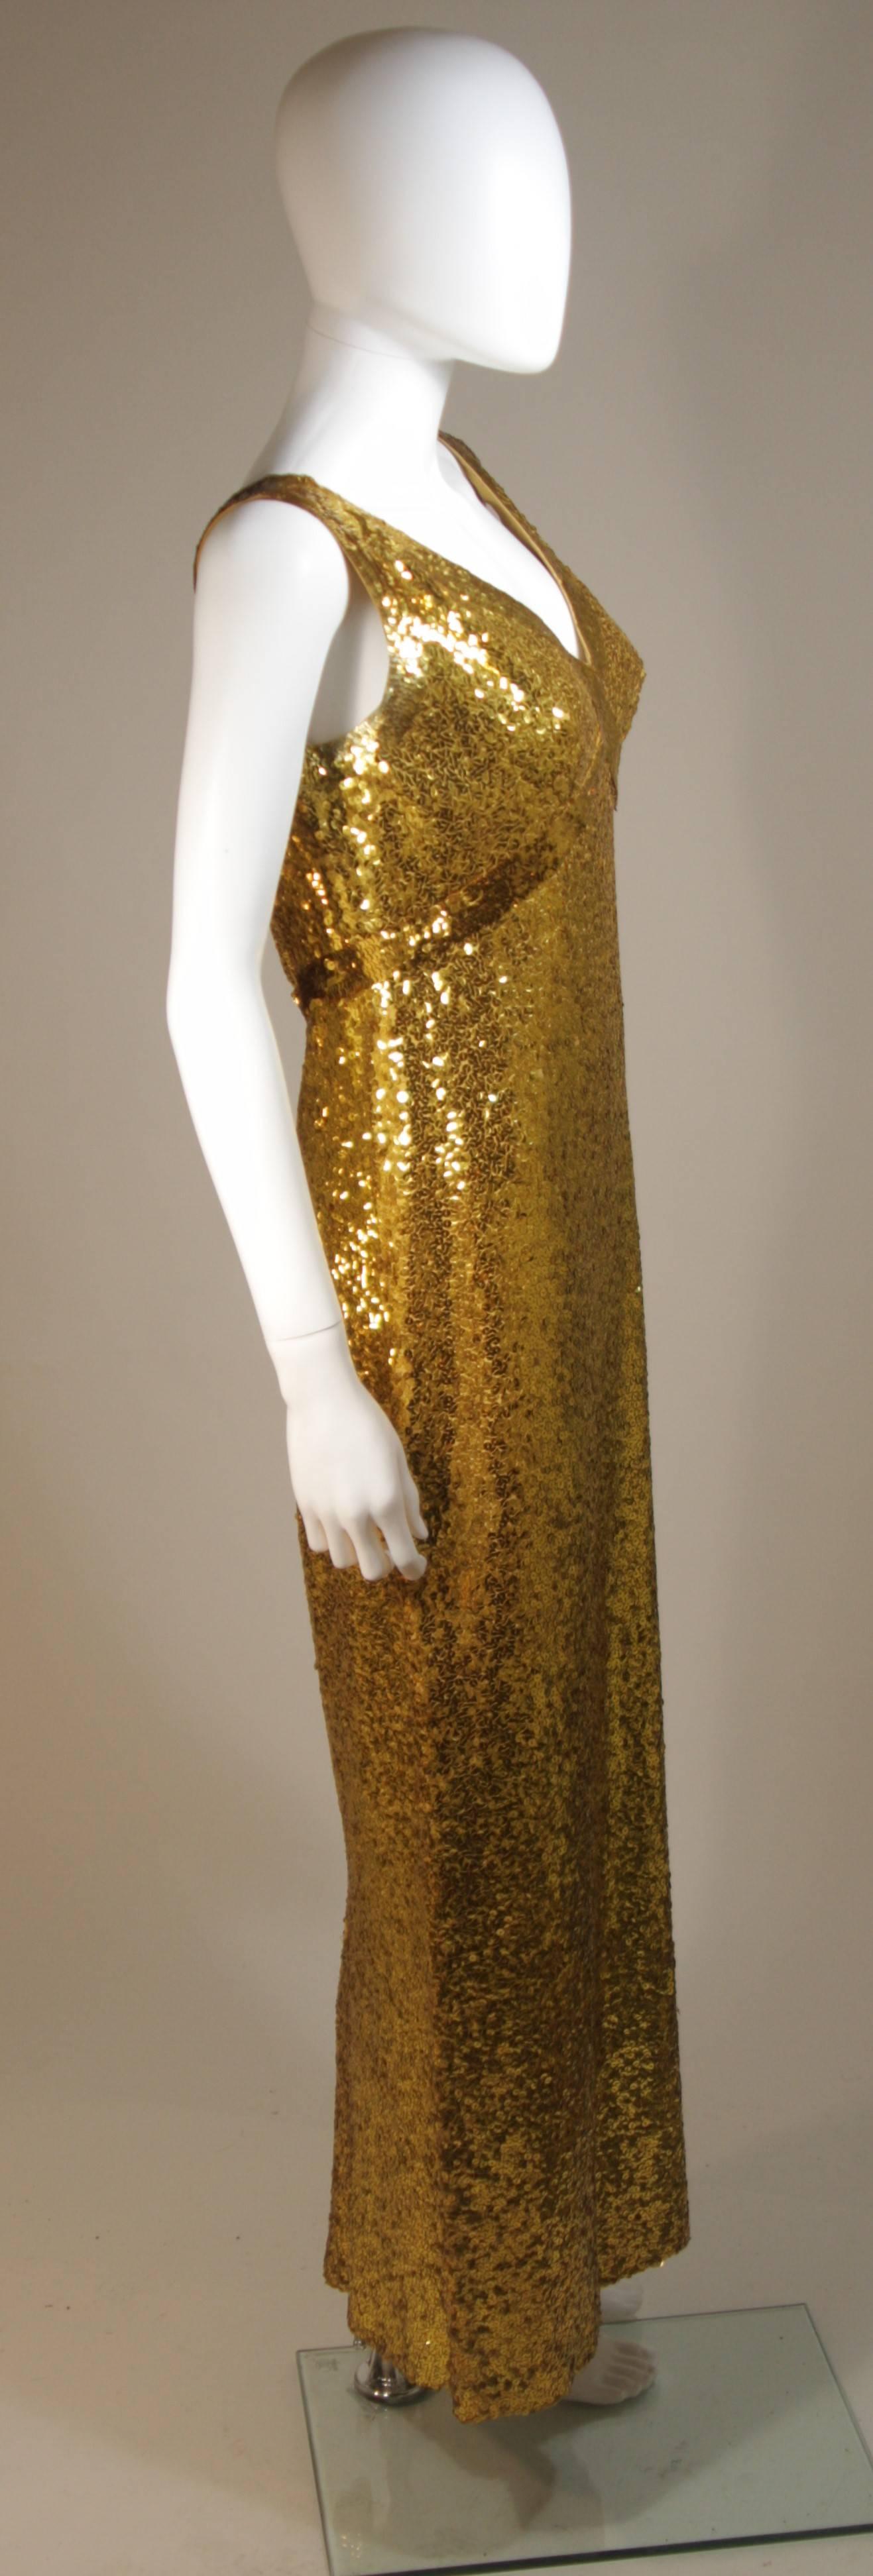 Women's IRENE SARGENT Gold Sequin Gown with Empire Bust Size 6-8 For Sale